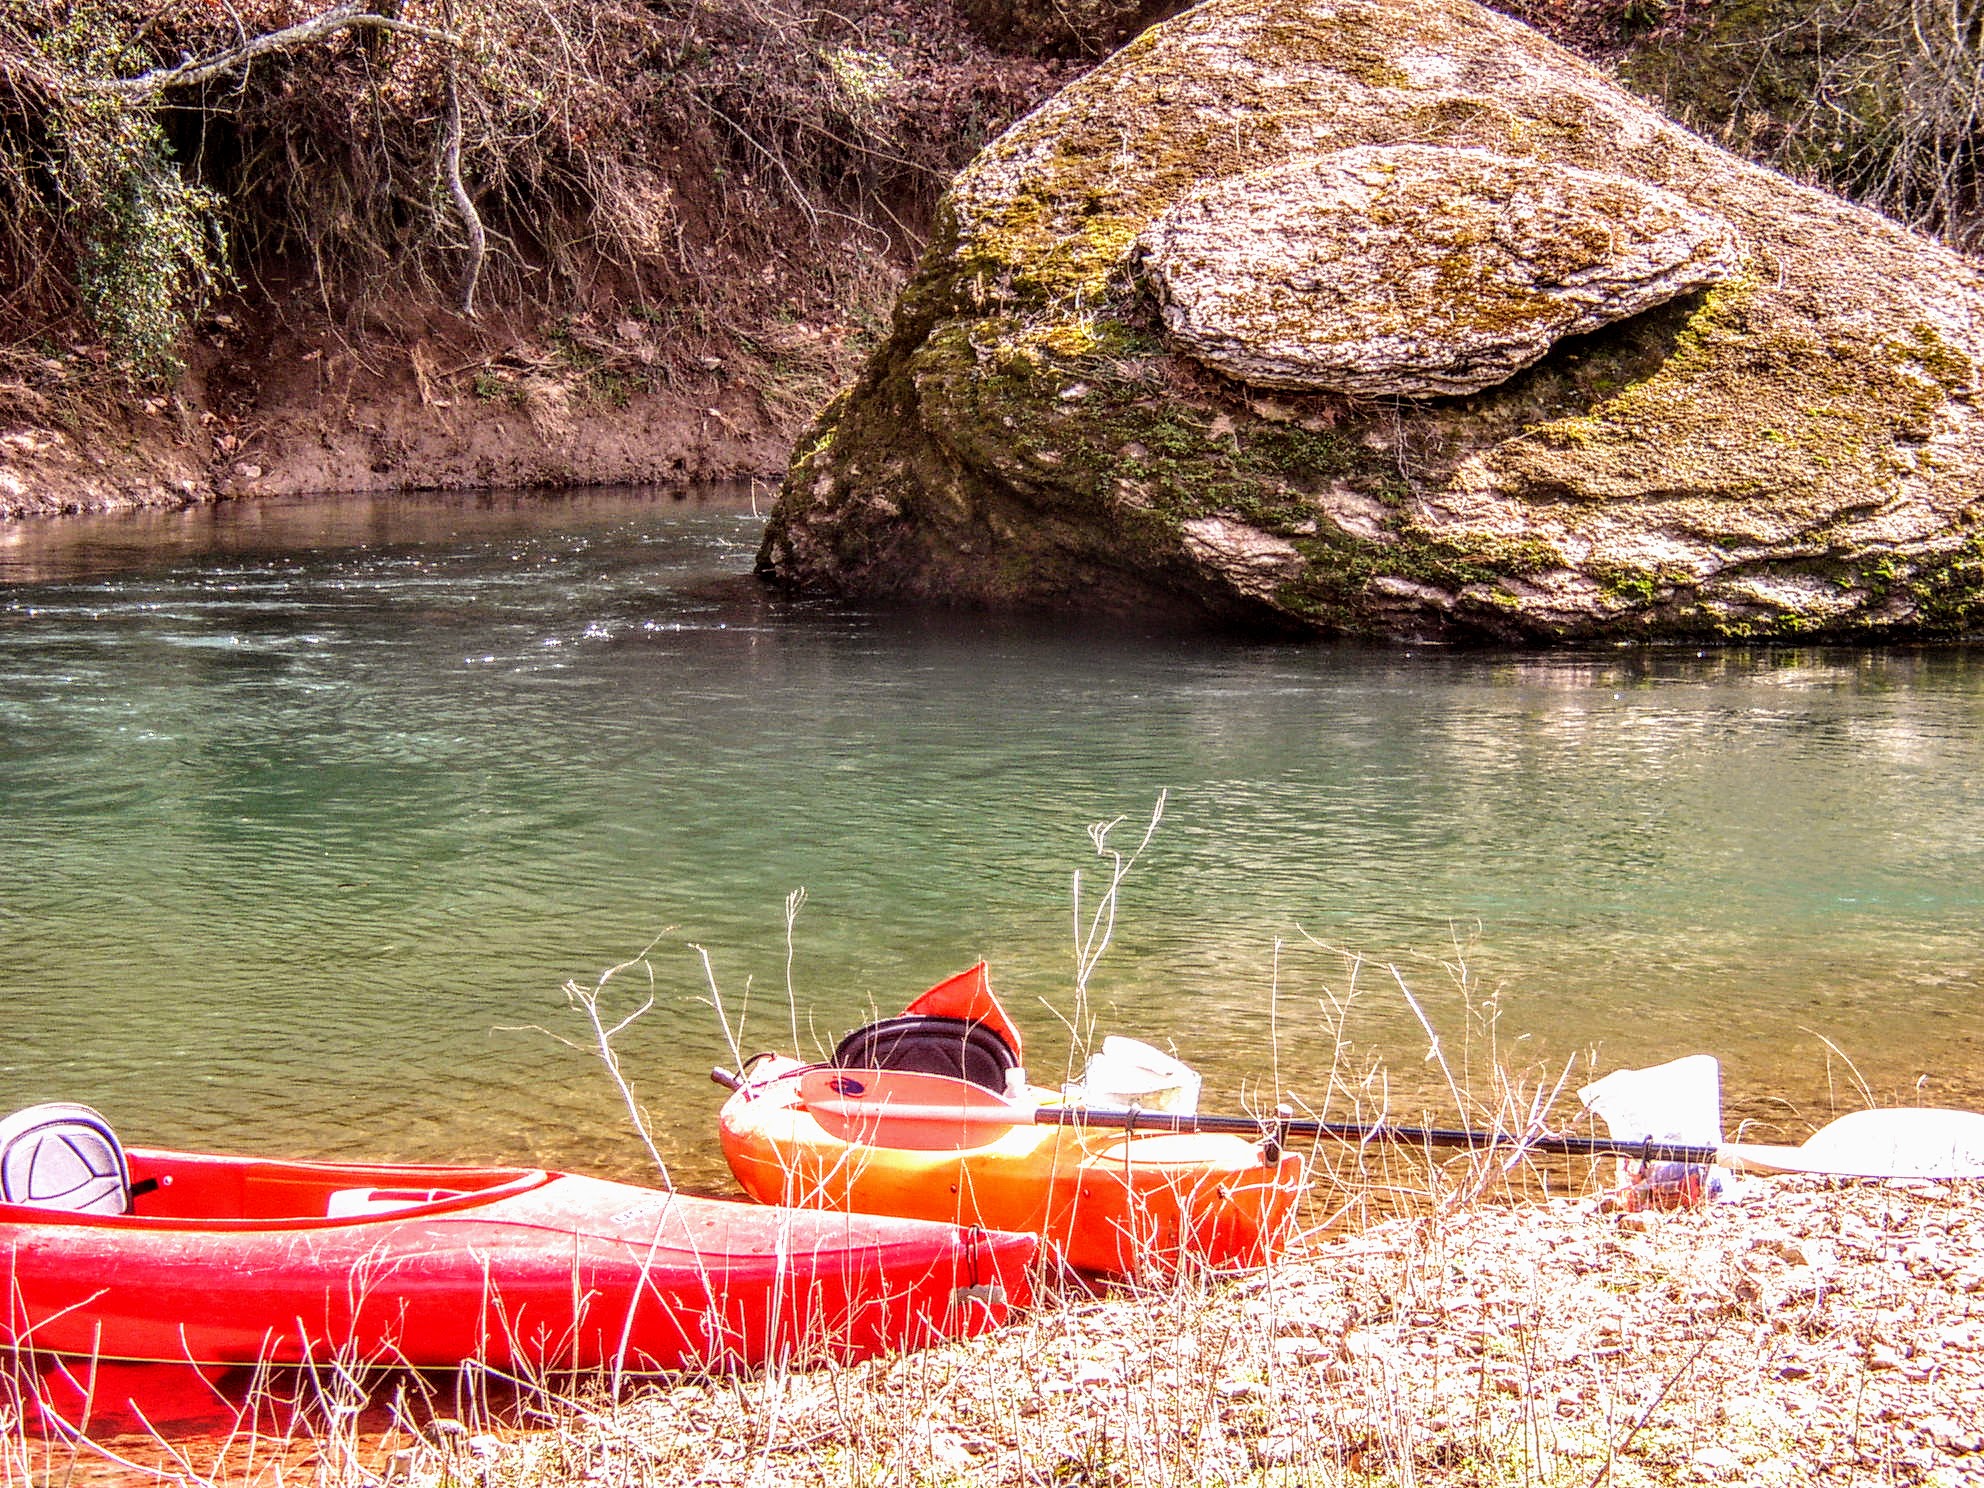 Two kayaks on the bank next to a large worn bluff rock